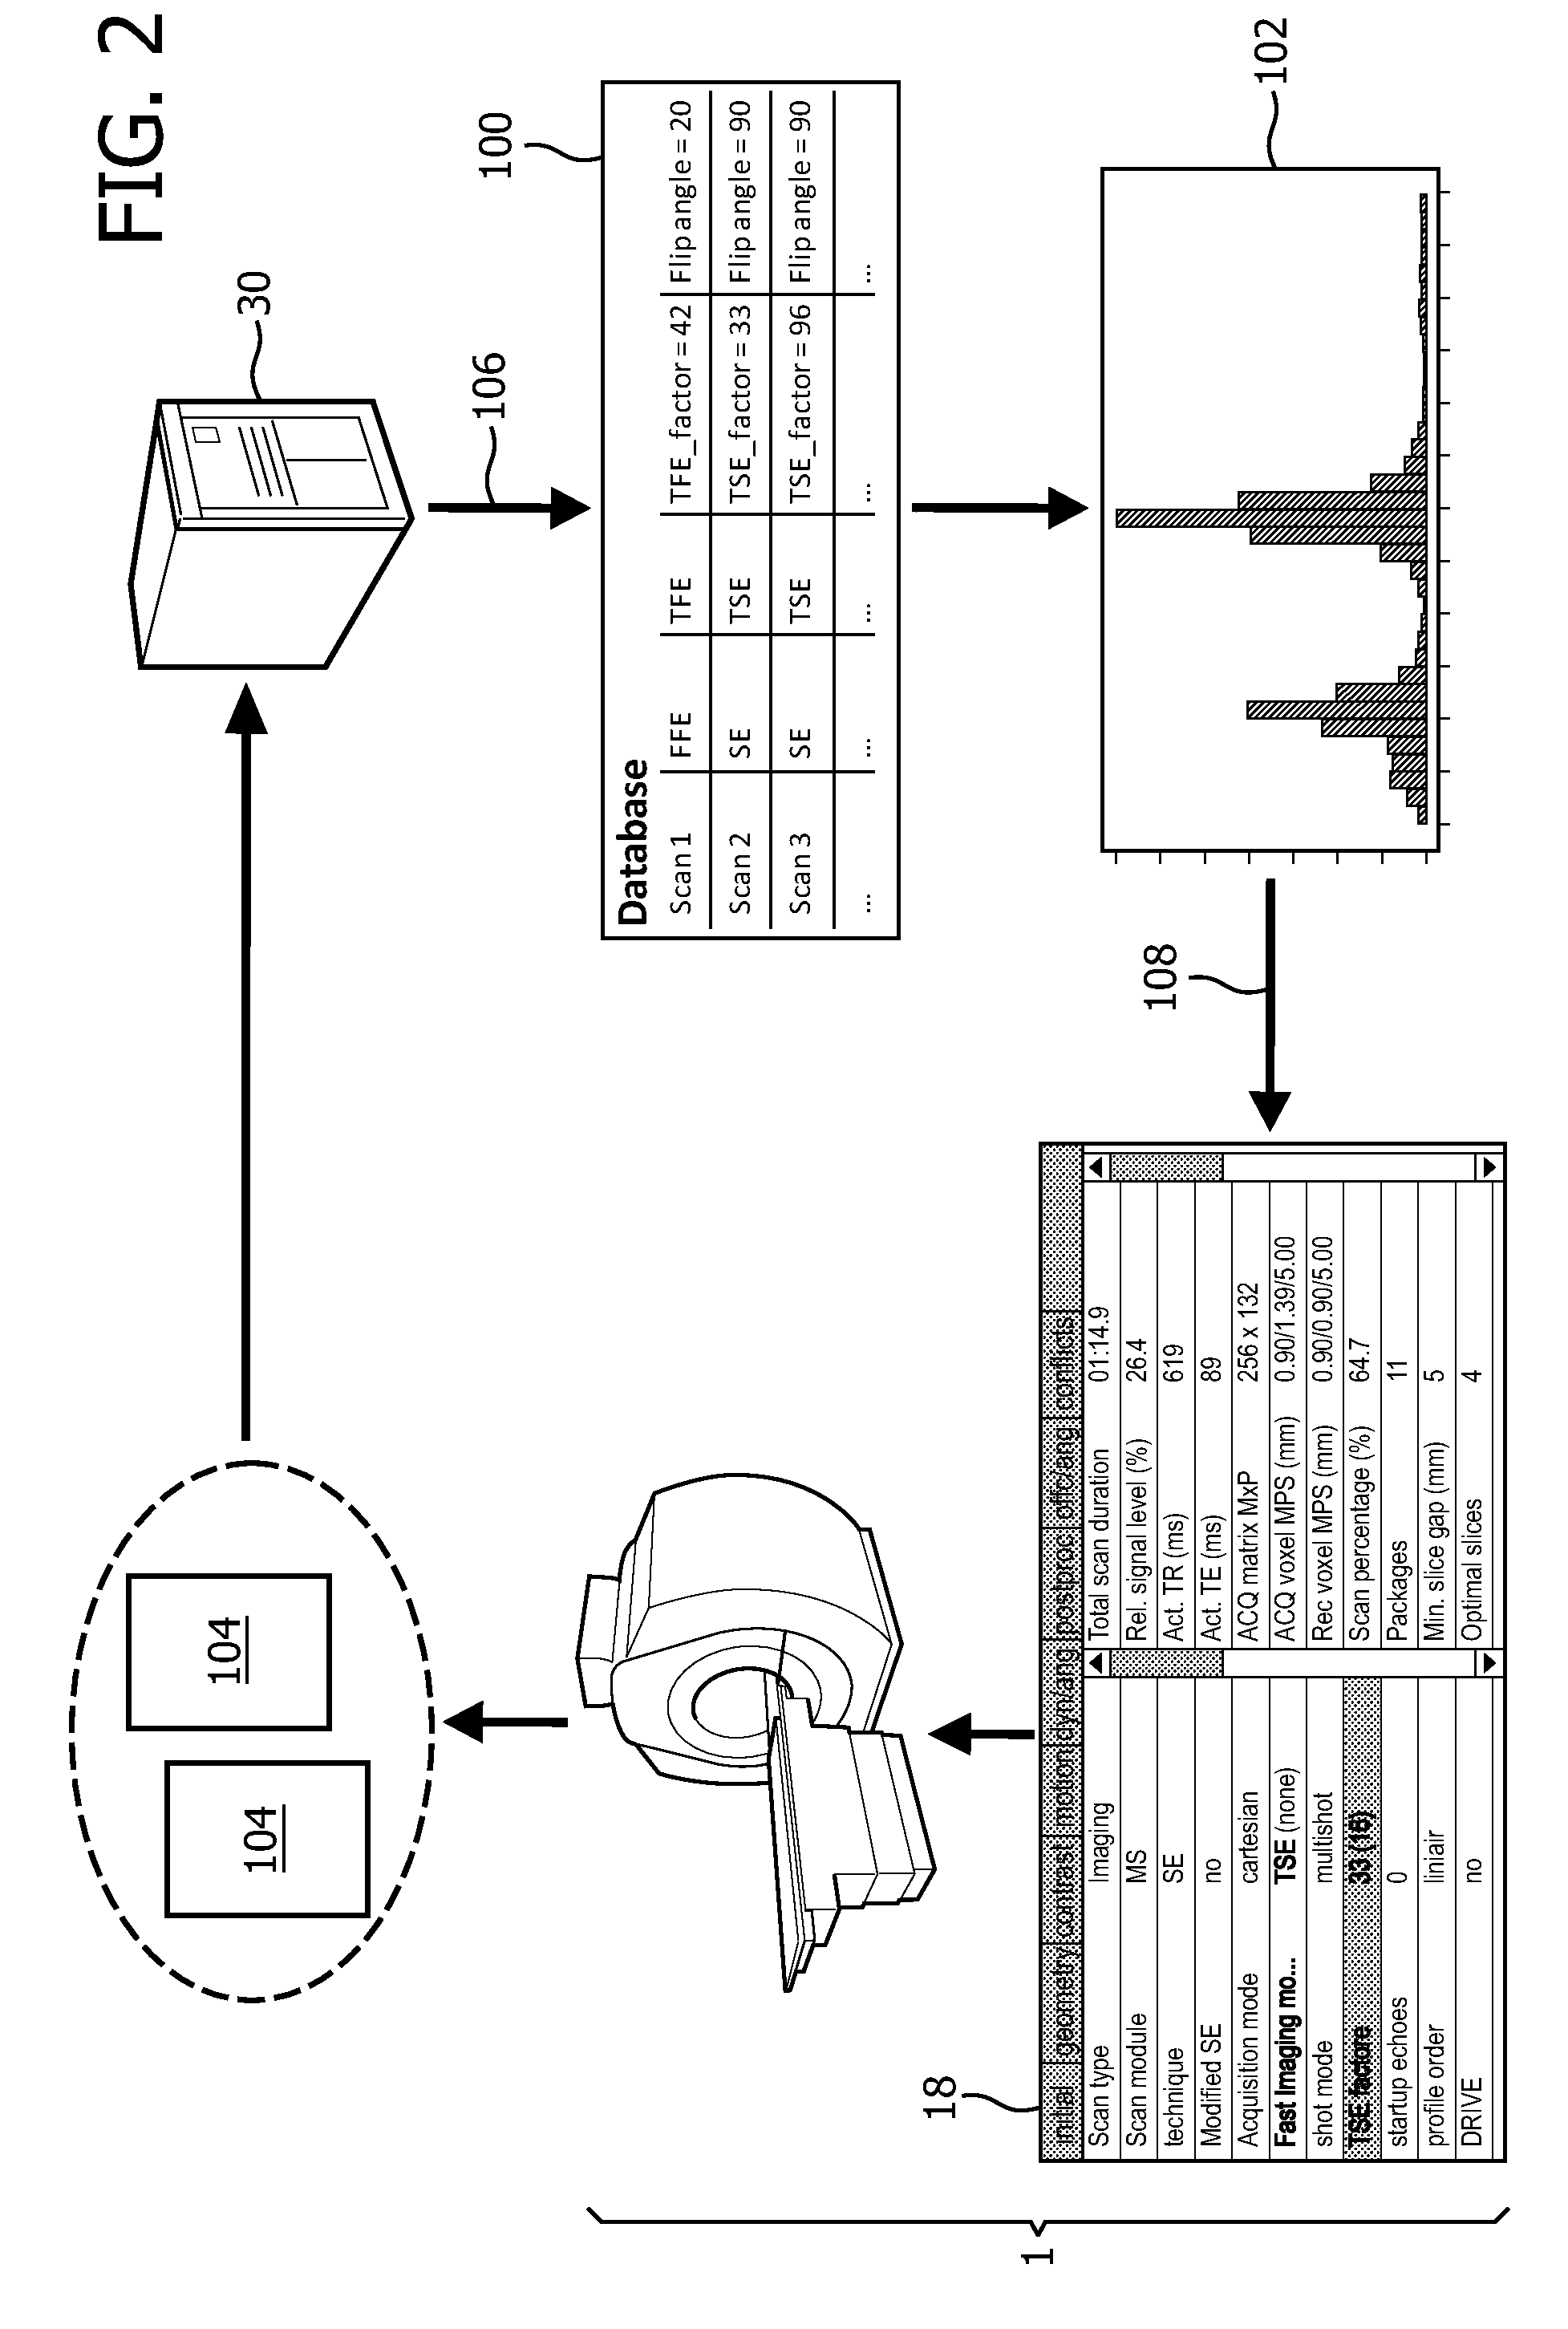 Magnetic resonance examination system with preferred settings based on data mining